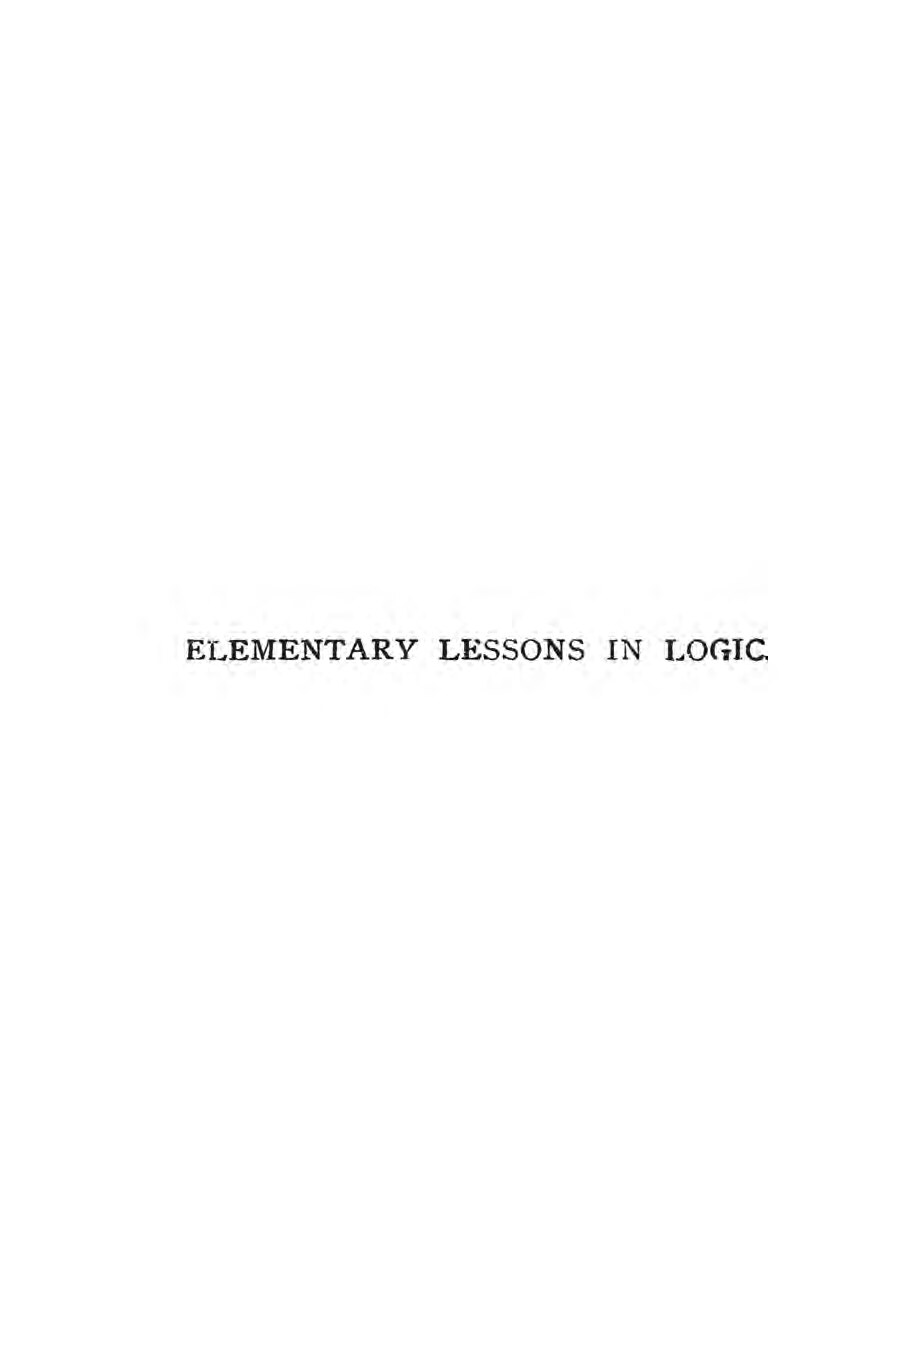 Elemntary Lessons in Logic